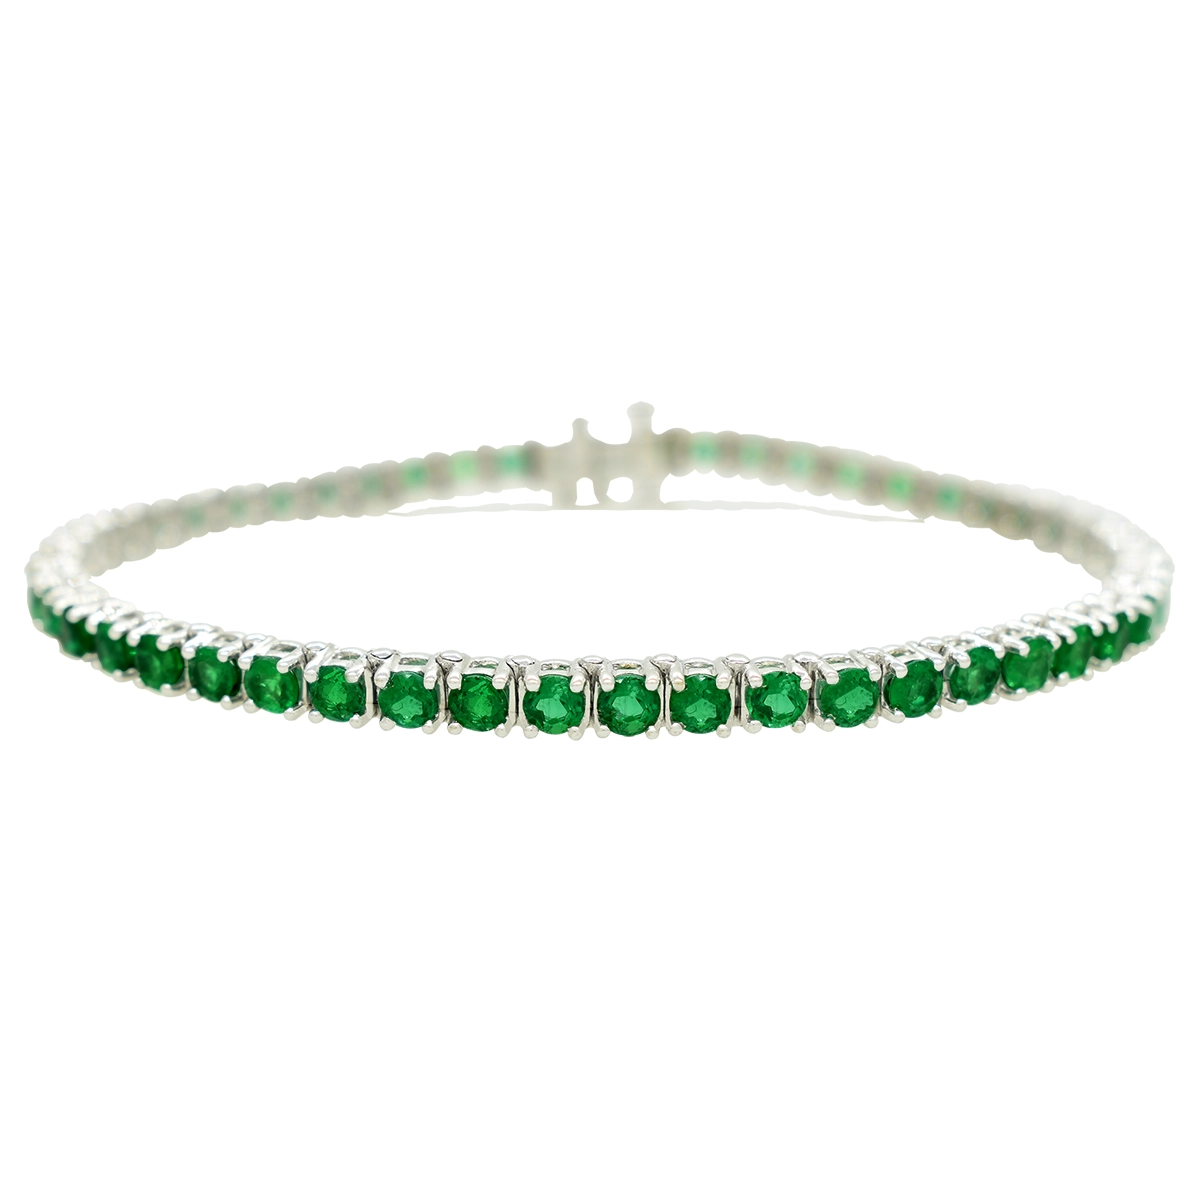 Tennis emerald bracelet with 5.25 Ct. t.w in 51 round cut natural Colombian emeralds set in solid 18K white gold classic 4 prongs setting